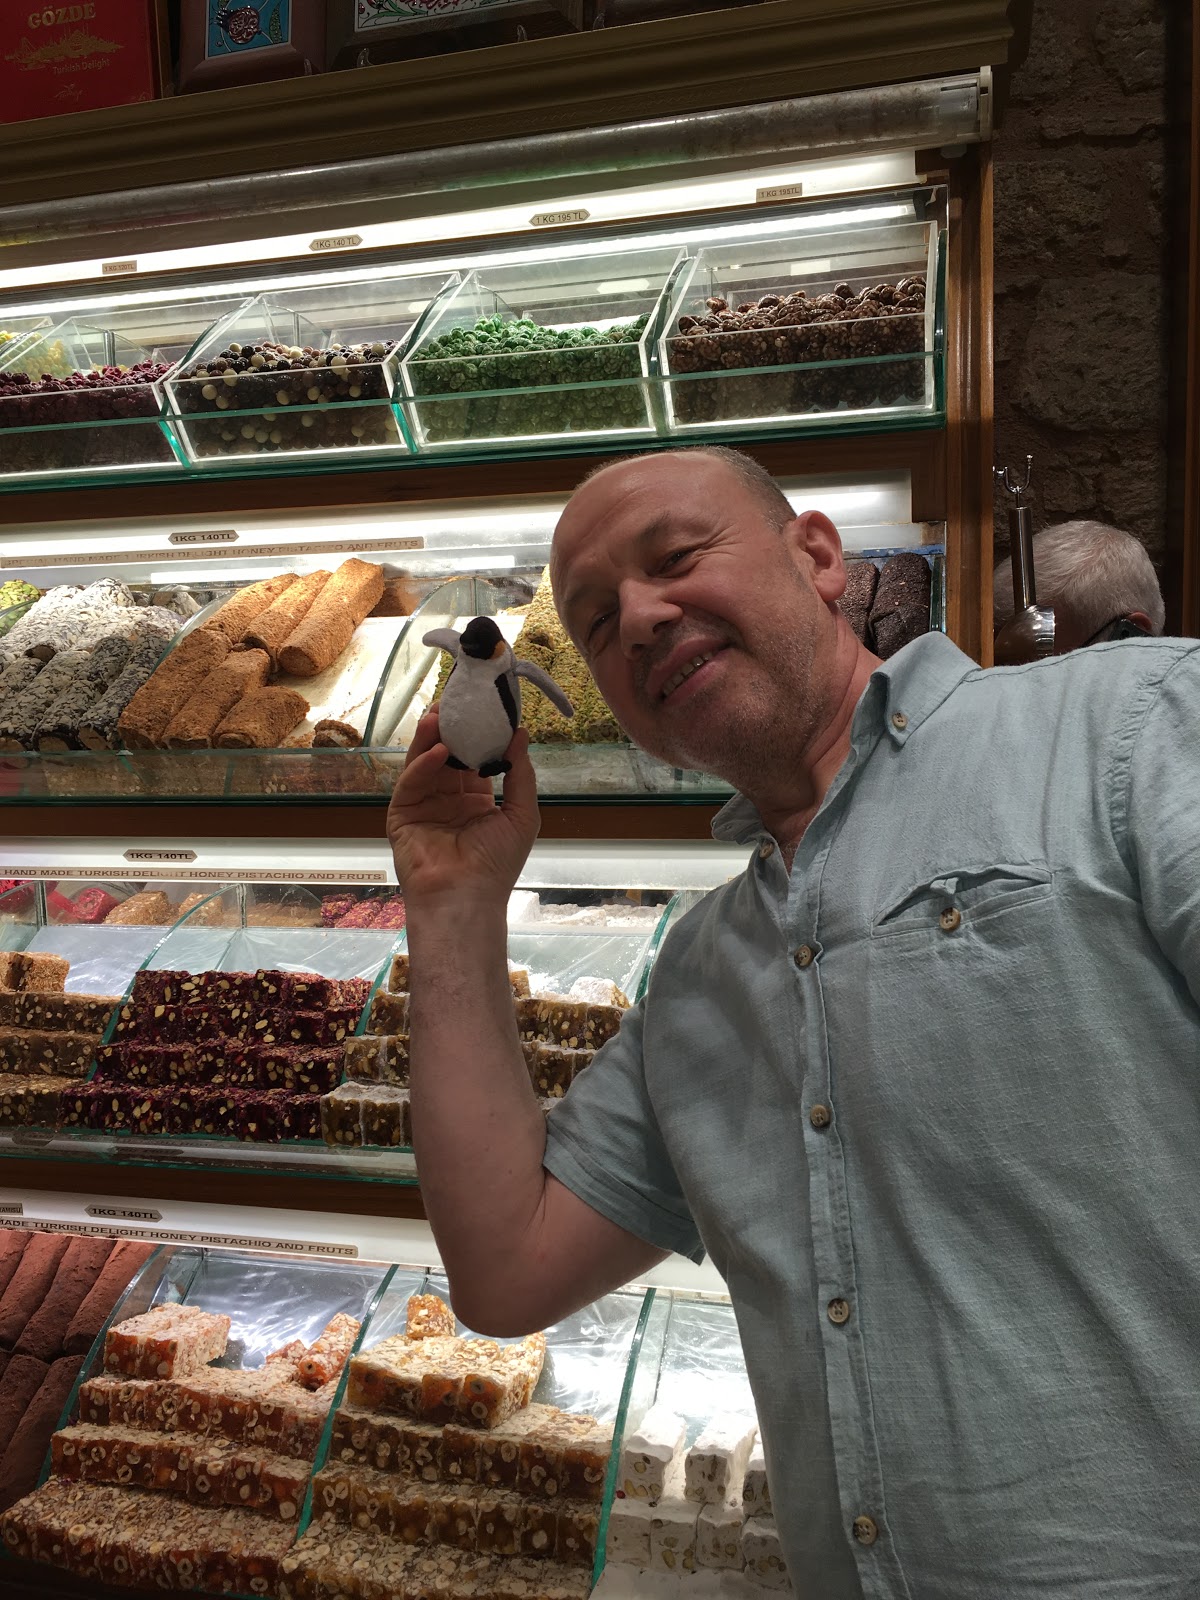 Travel inspecting Turkish Delight choices